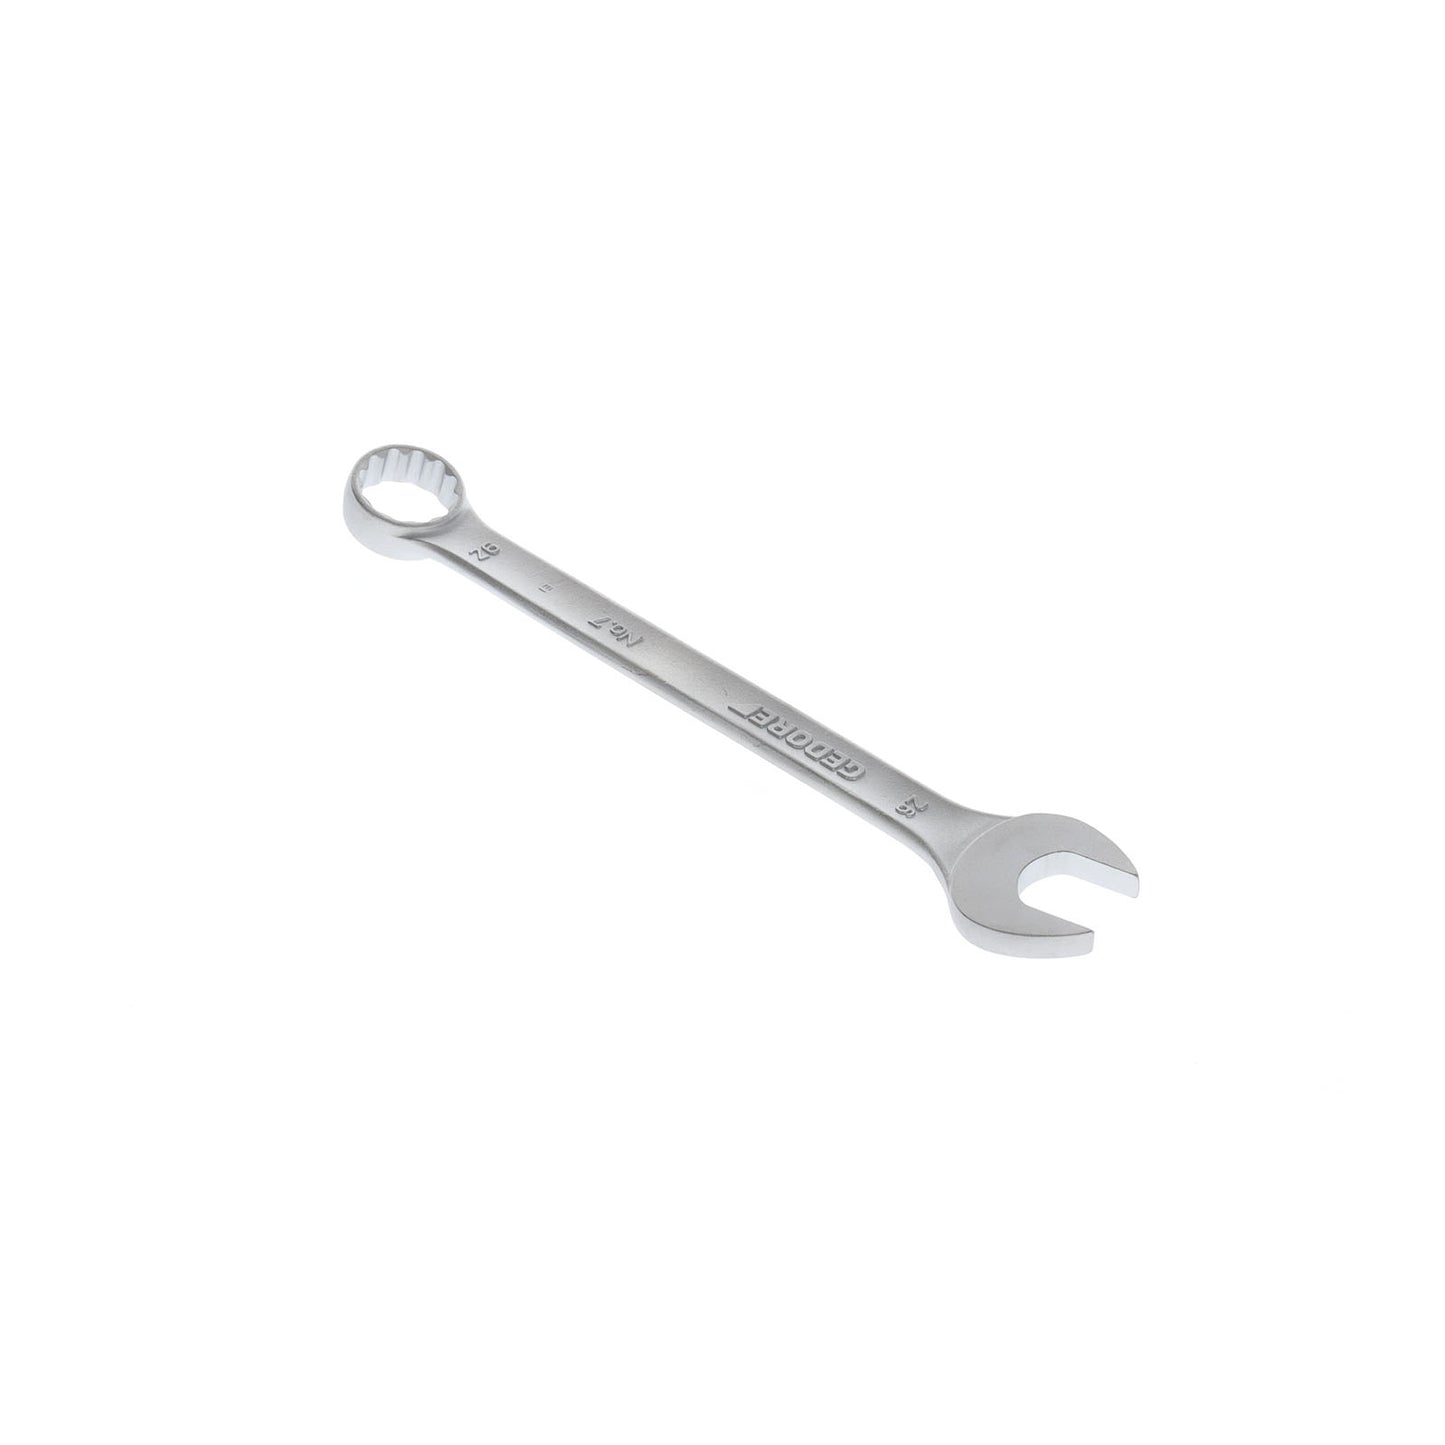 GEDORE 7 26 - Combination Wrench, 26 mm (6092420)